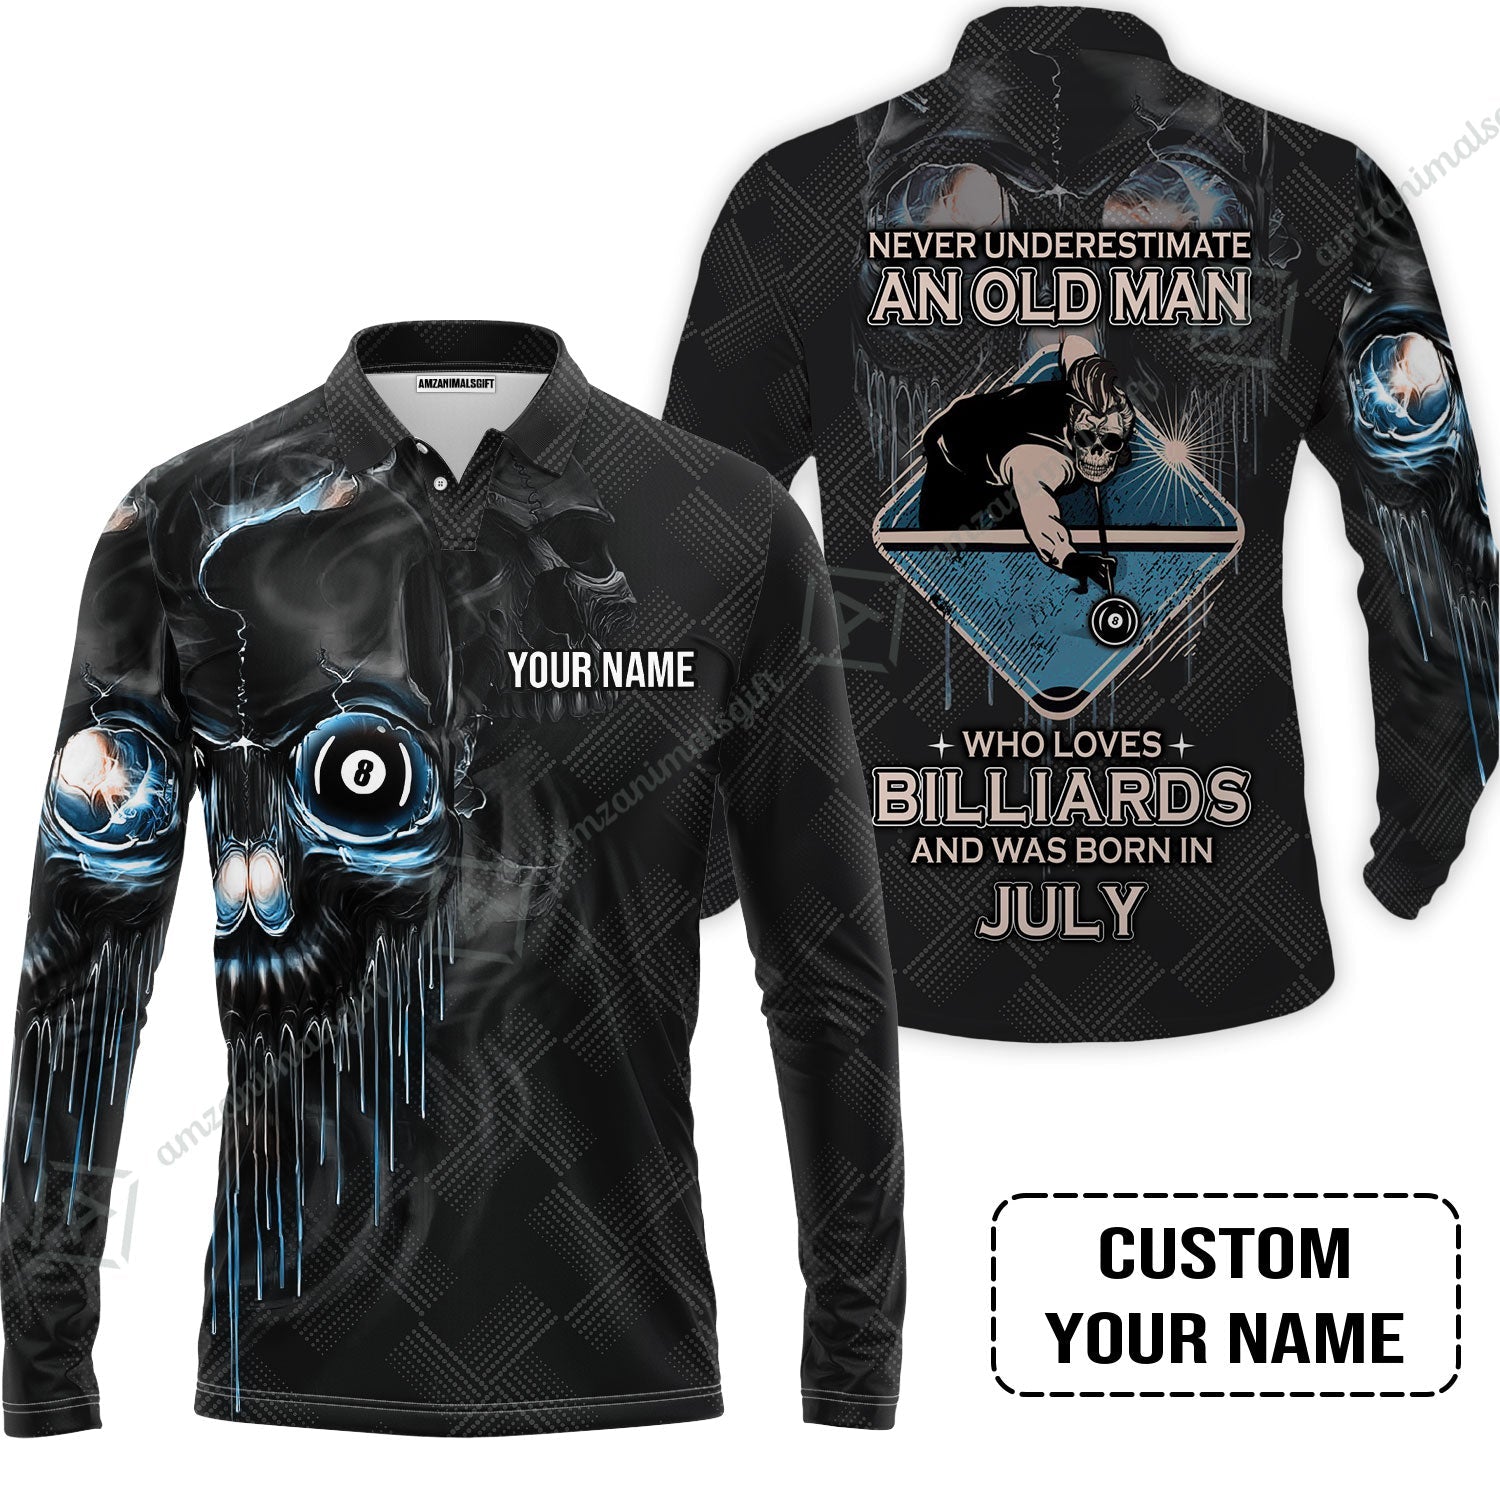 Customized Billiard Long Polo Shirt - Pool 8 Ball Never Underestimate An Old Man And Was Born In July Personalized Long Polo Shirt